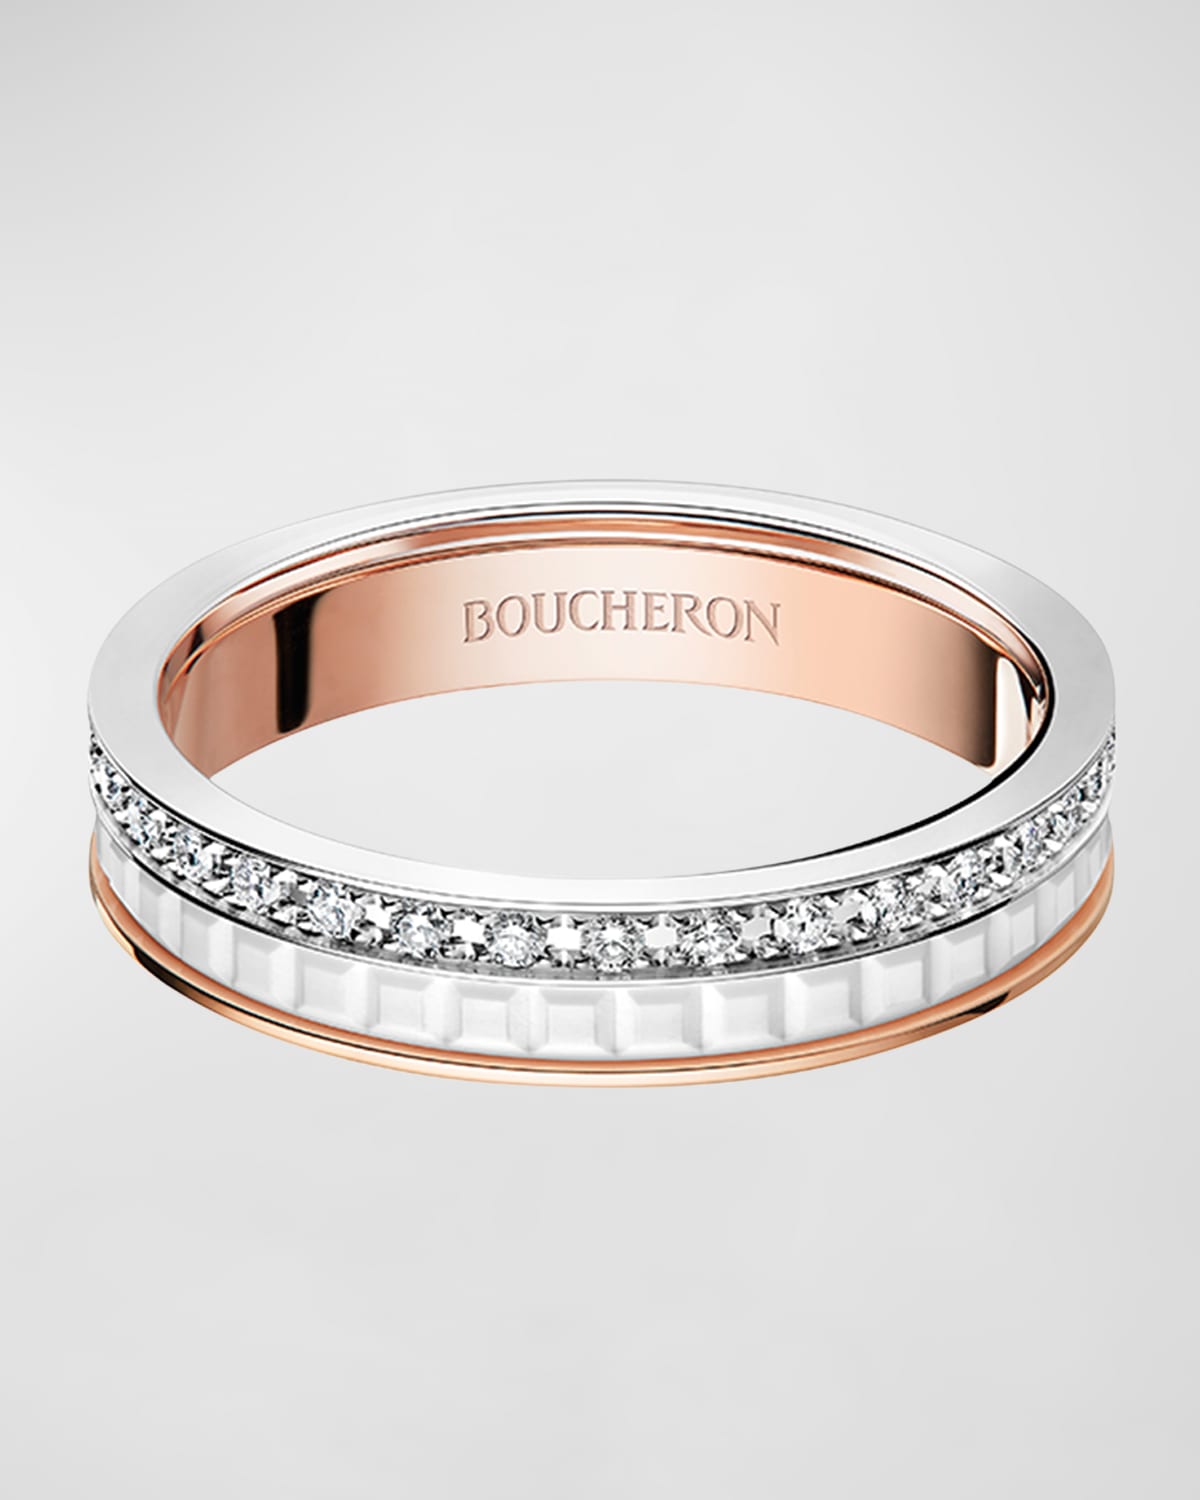 Boucheron Quatre White Edition Ring in White Gold and Pink Gold, Size 52